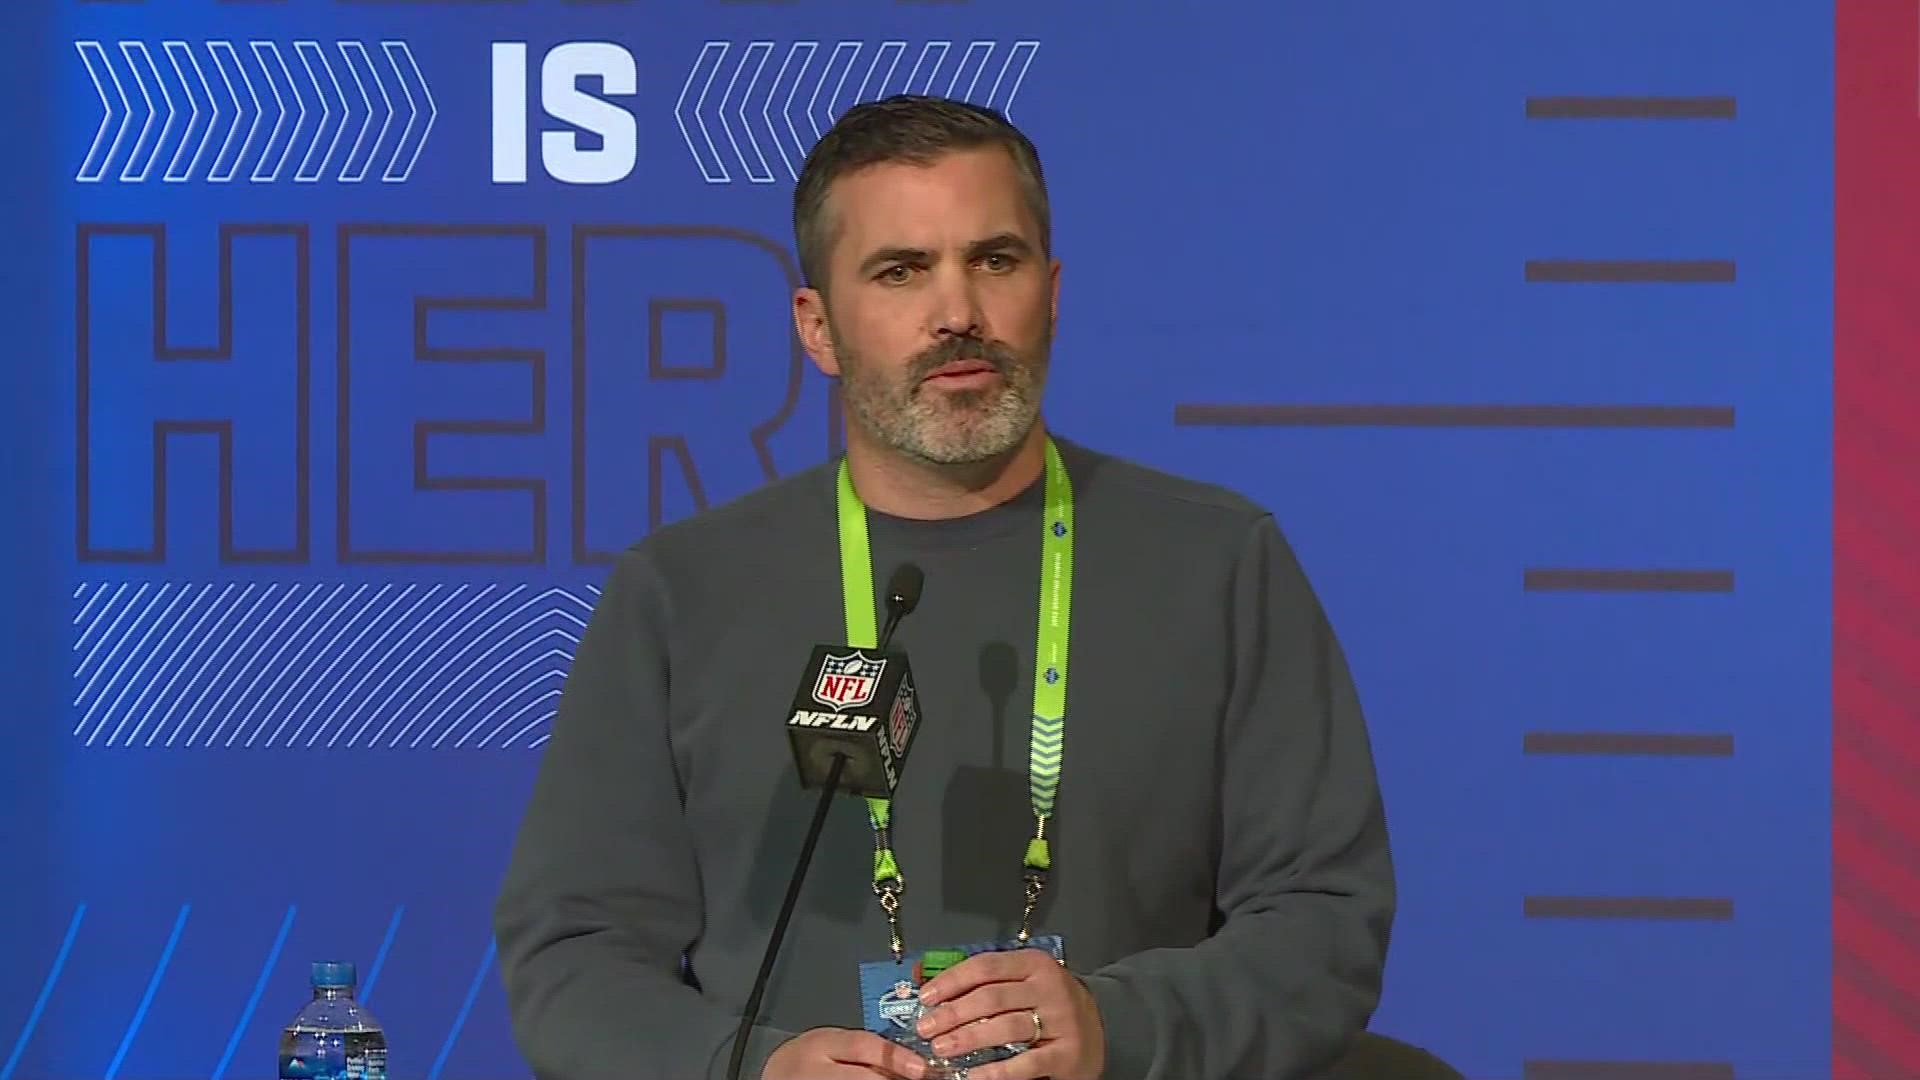 Speaking to reporters at the NFL Scouting Combine, Browns head coach Kevin Stefanski said he has confidence in Baker Mayfield.